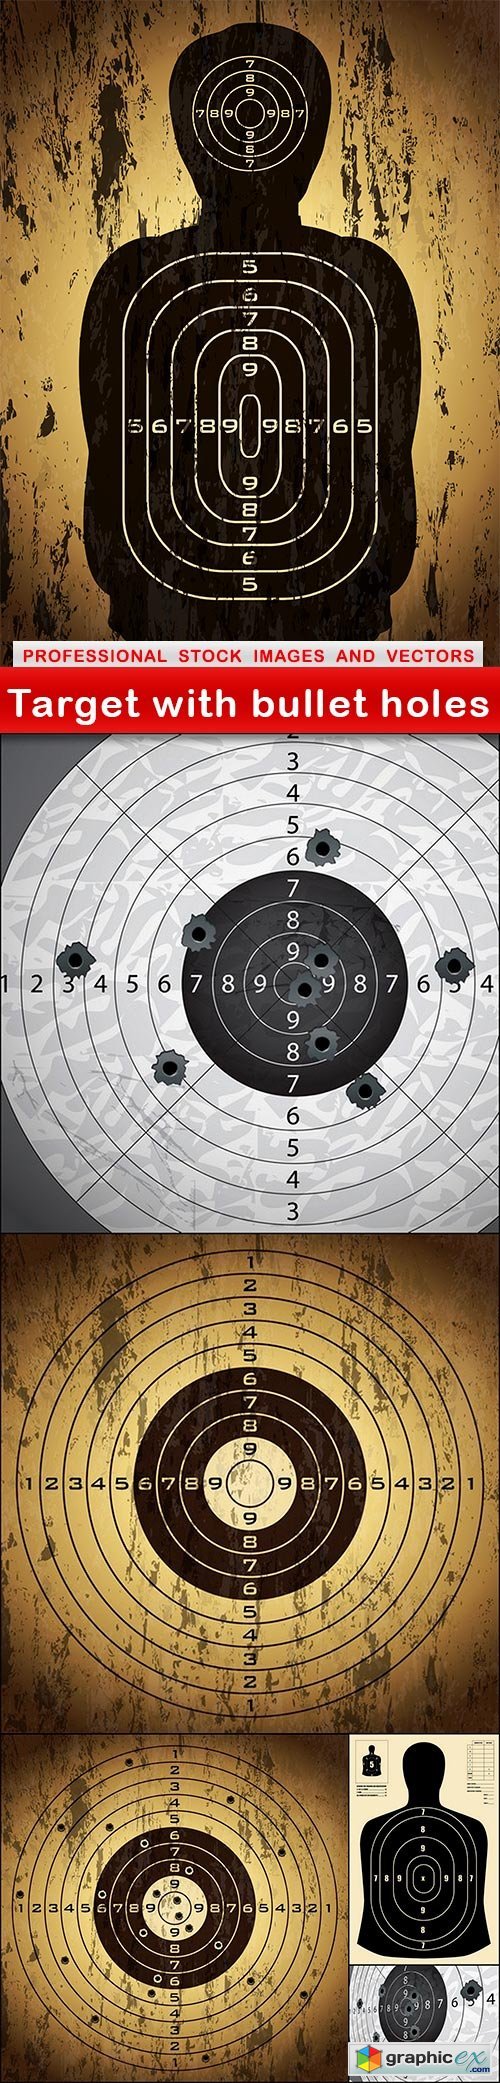 Target with bullet holes - 6 EPS